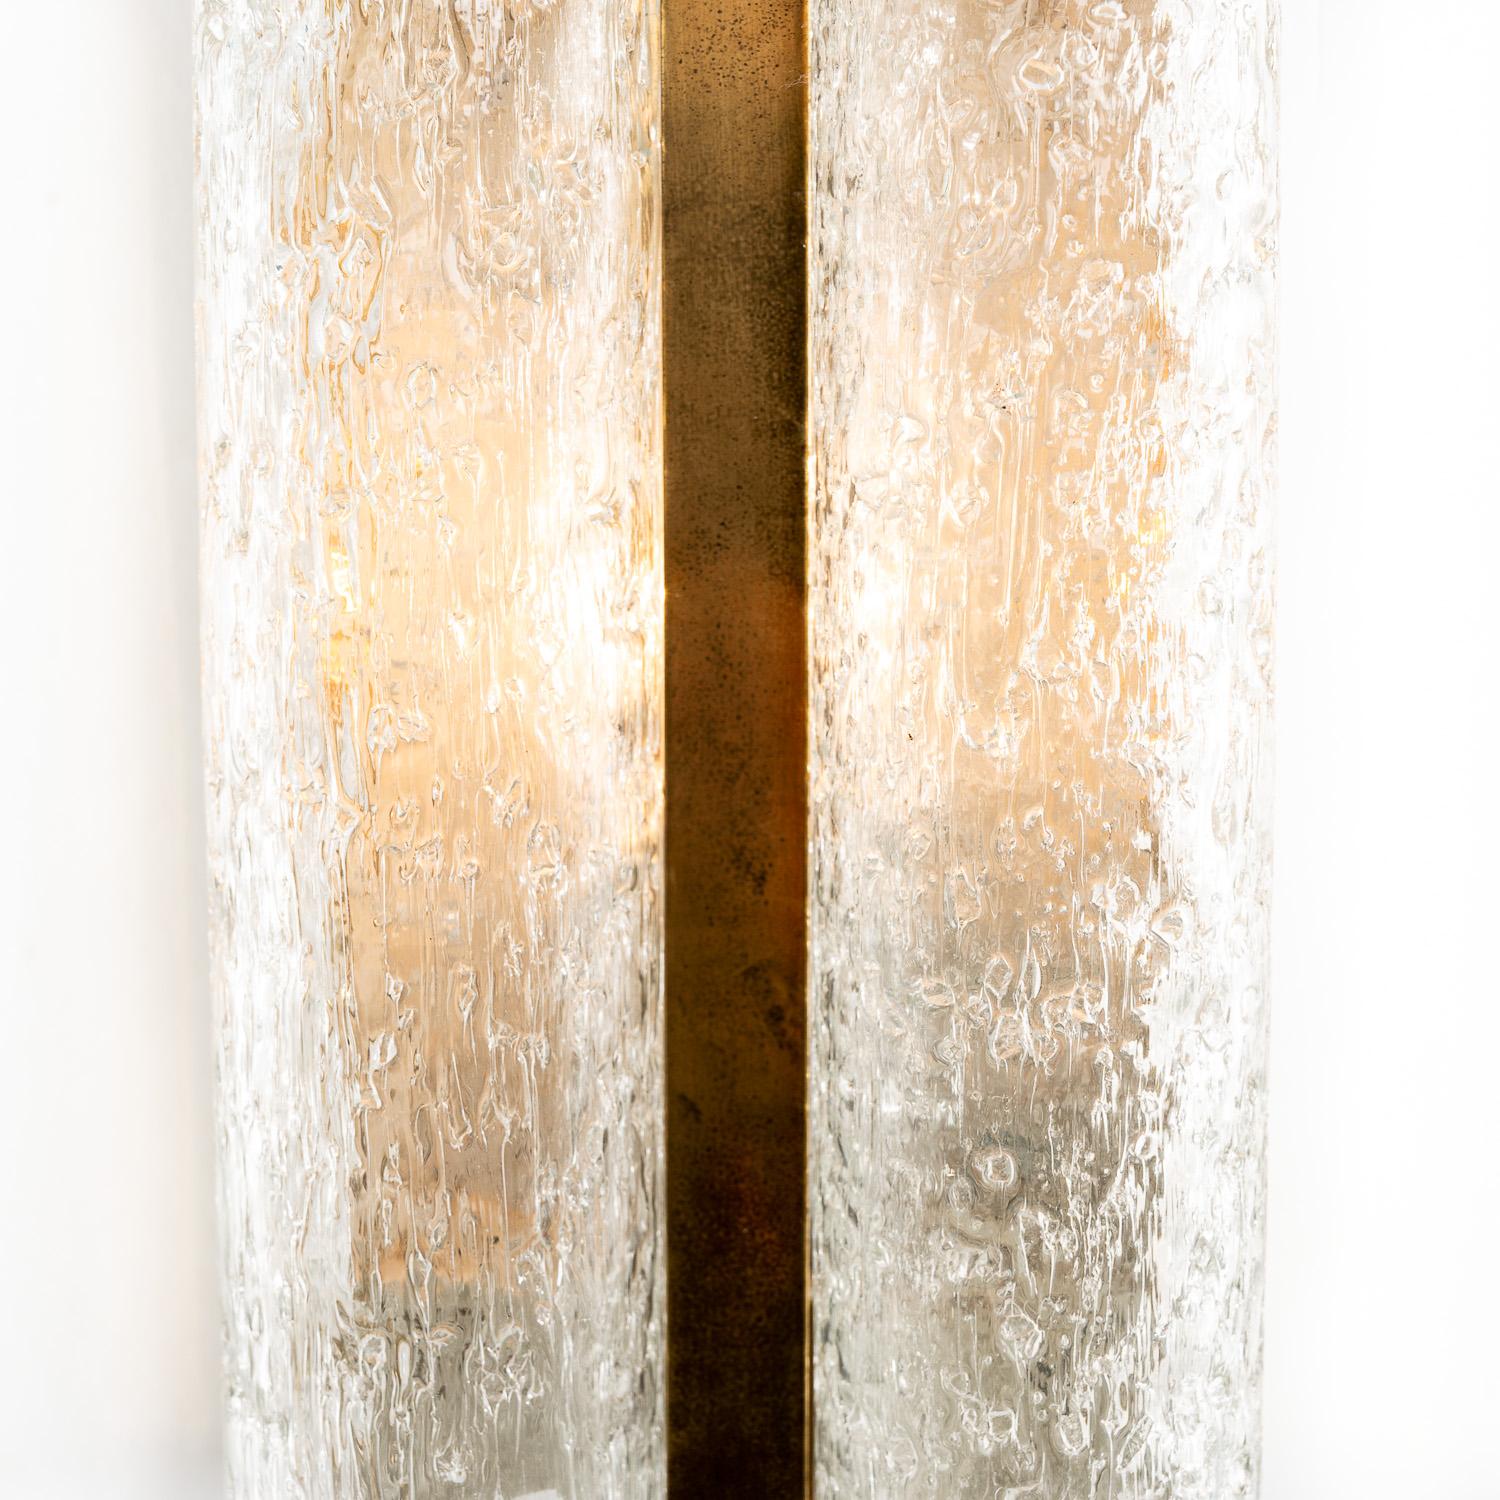 1960's Brass, Metal & Glass Tubes Sconces by Doria In Good Condition For Sale In Schoorl, NL